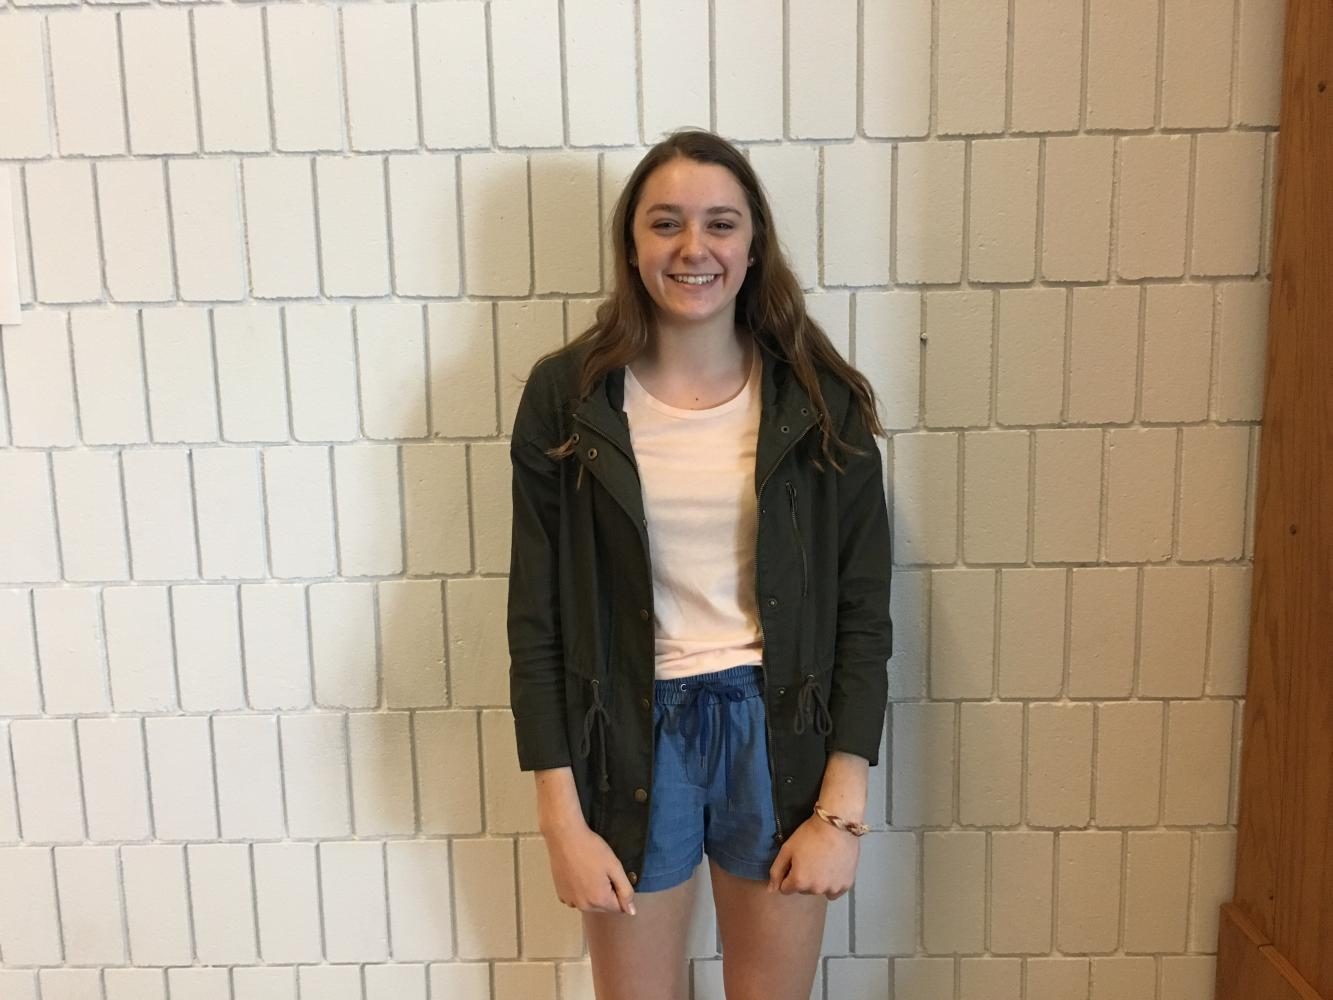 Sophomore Janie Brunell will take over as SADDs new president during next year. She hopes to bring greater awareness to the community about destructive decisions and their repercussions.